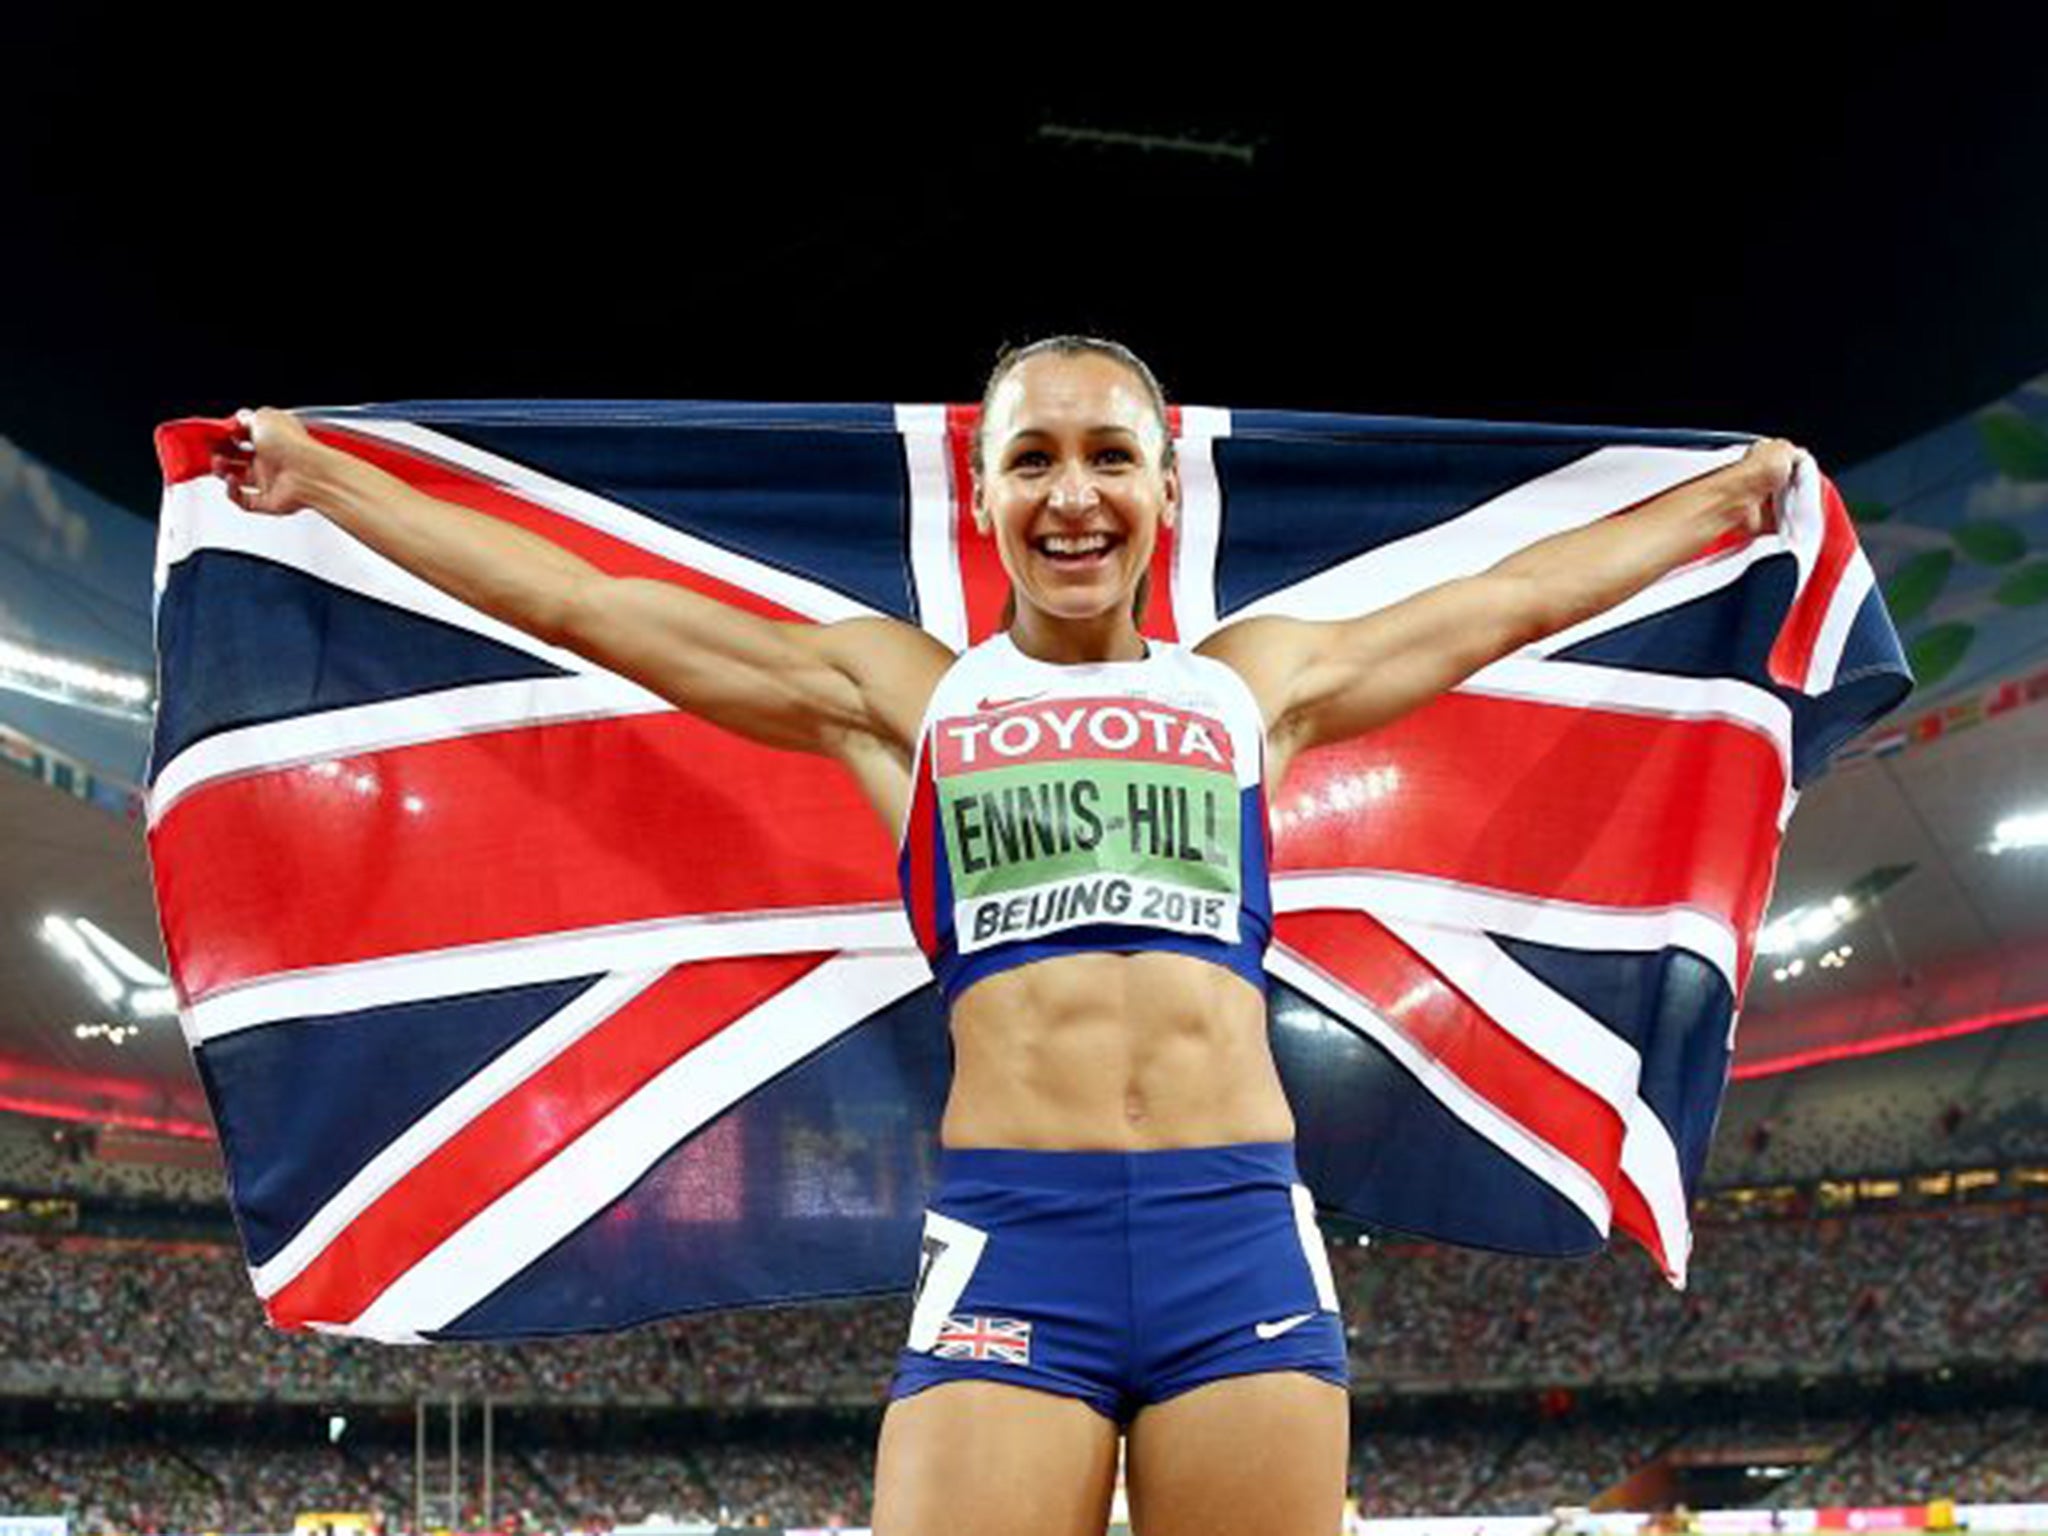 Jessica Ennis-Hill triumphs for Britain in the heptathlon at the athletics World Championships in Beijing this summer